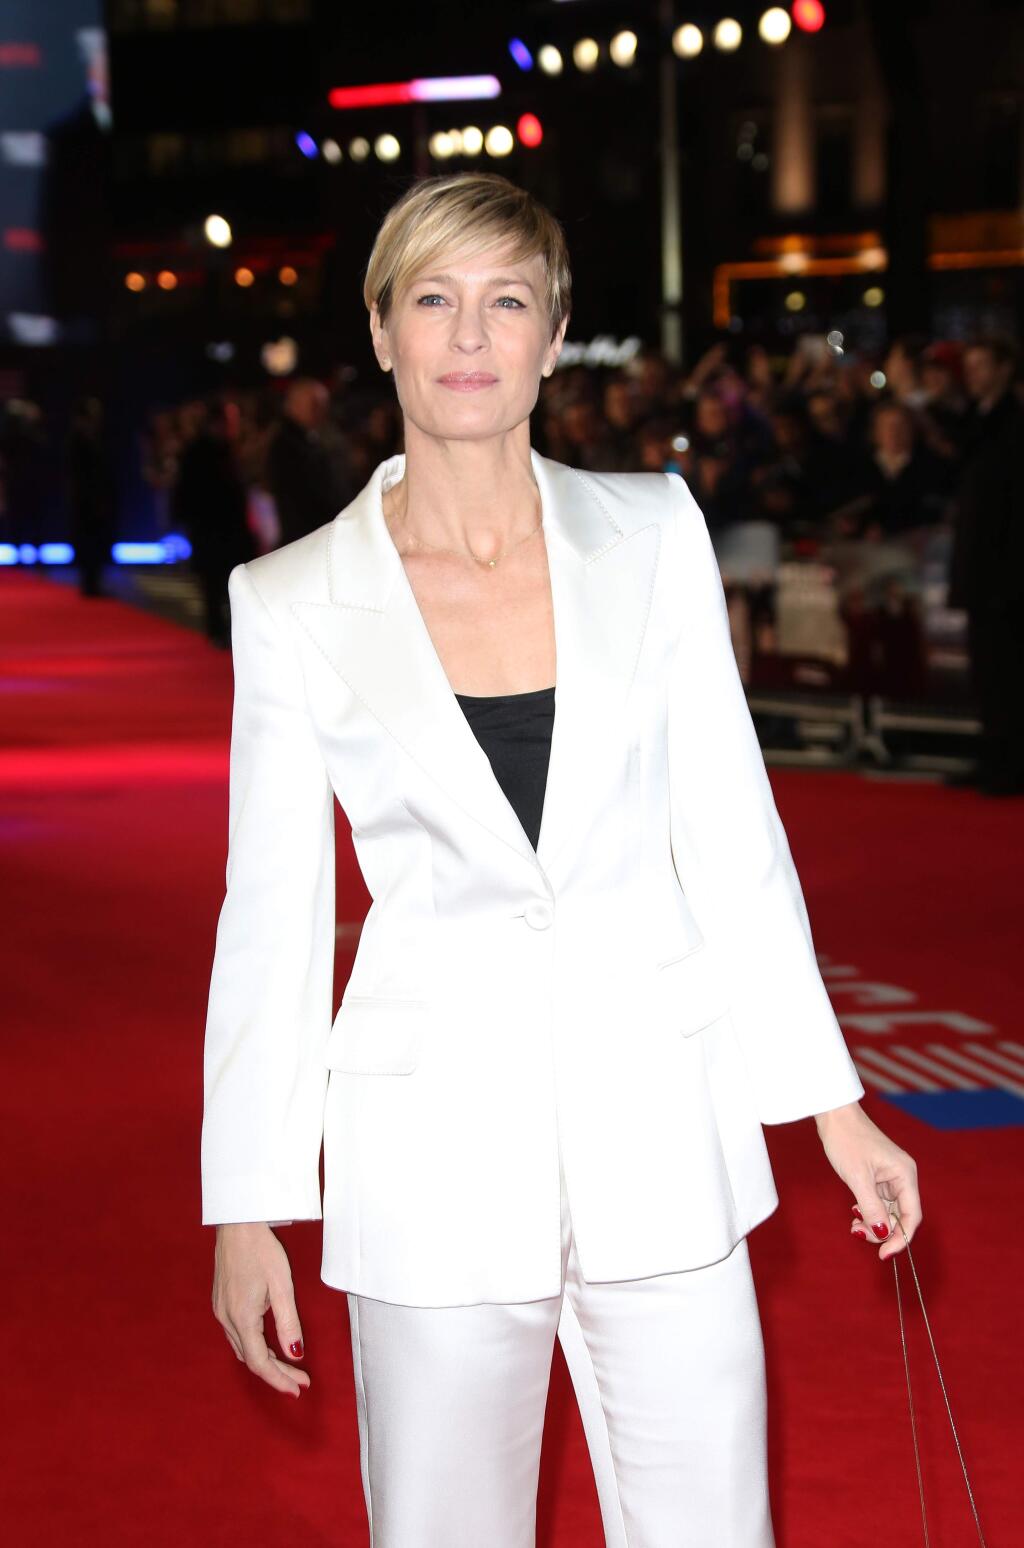 Actress Robin Wright poses for photographers upon arrival at the House Of Cards season 3 World Premiere at the Empire Cinema in central London, Thursday, Feb. 26, 2015. (Photo by Joel Ryan/Invision/AP)